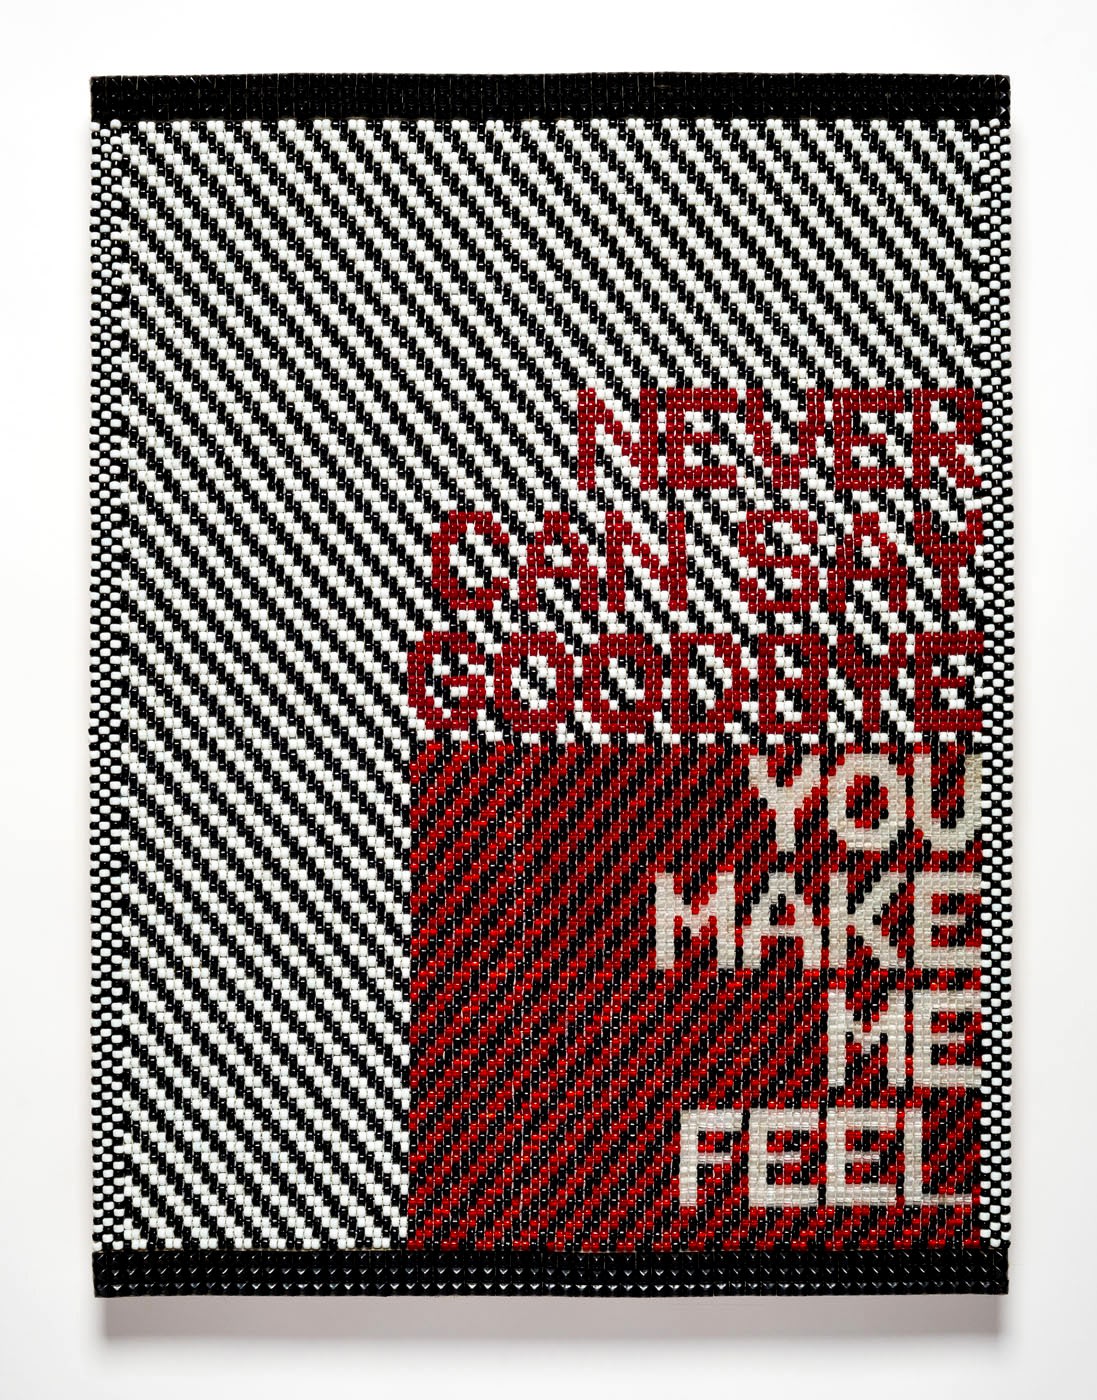 Jeffrey Gibson, NEVER CAN SAY GOODBYE - YOU MAKE ME FEEL, 2016